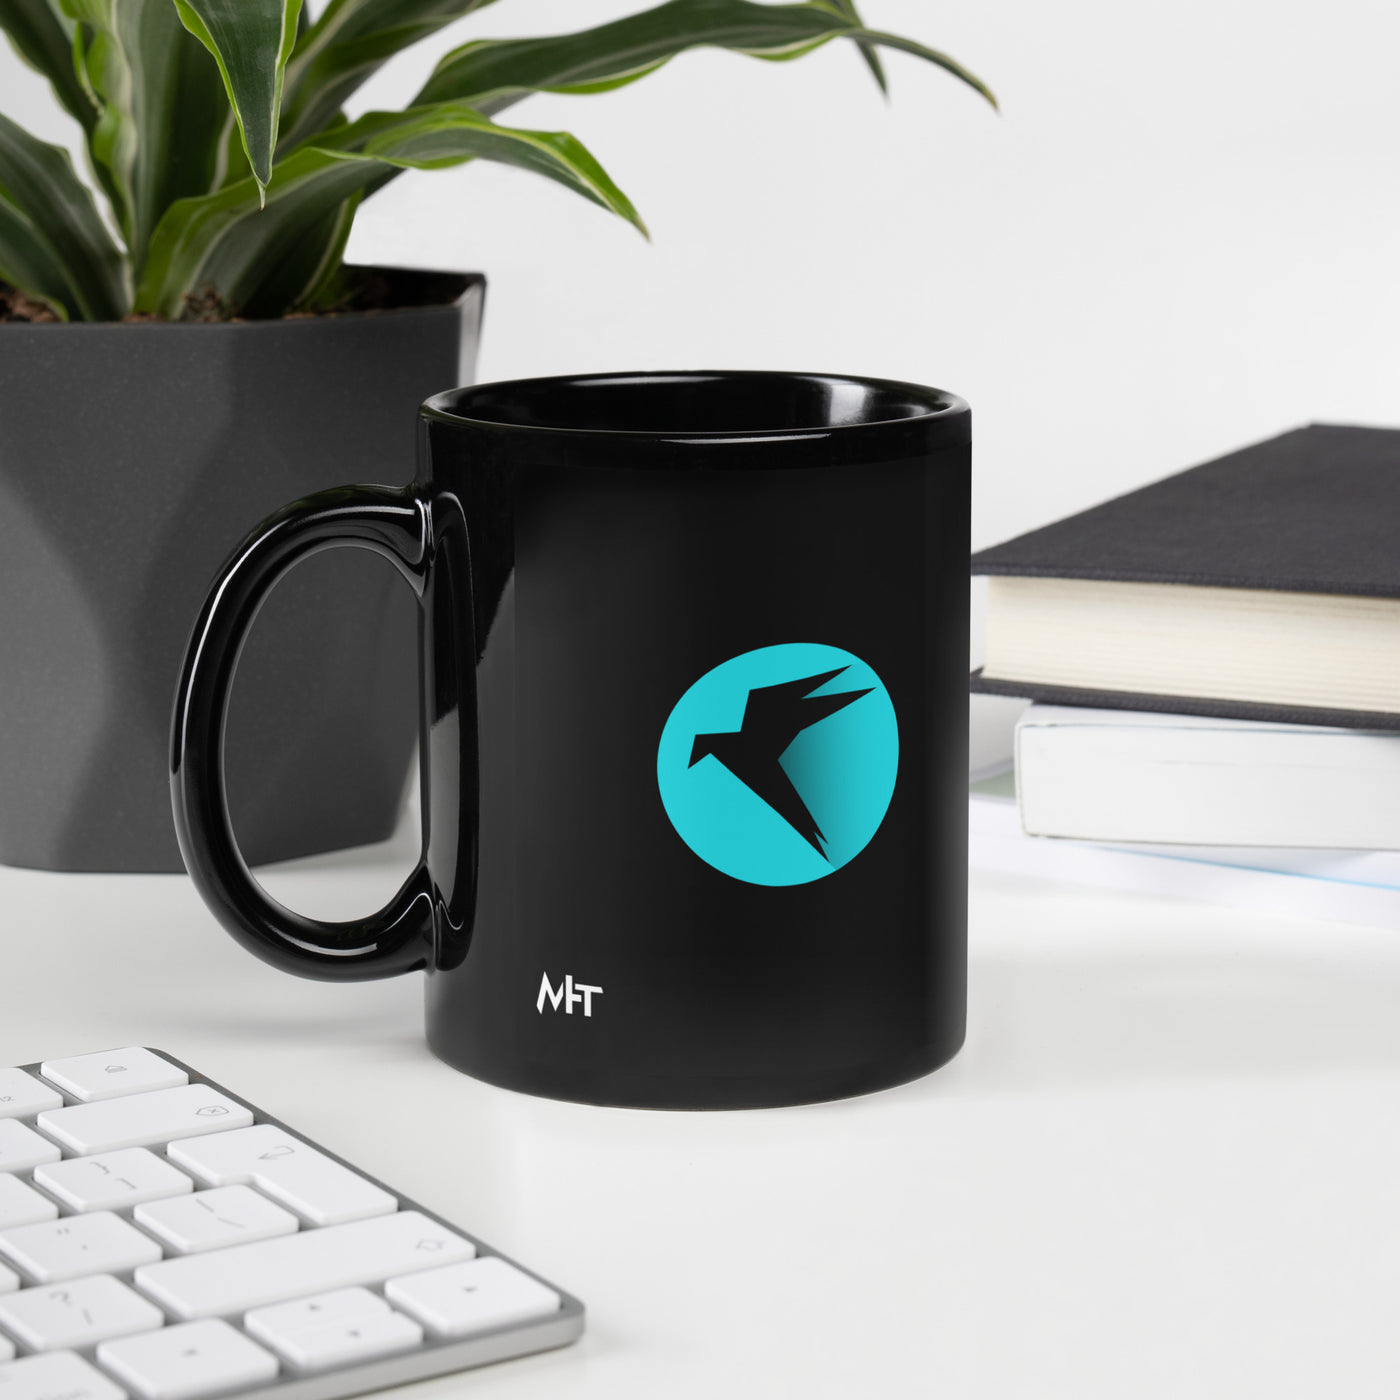 Parrot OS - The Operating System for Hackers  - Black Glossy Mug